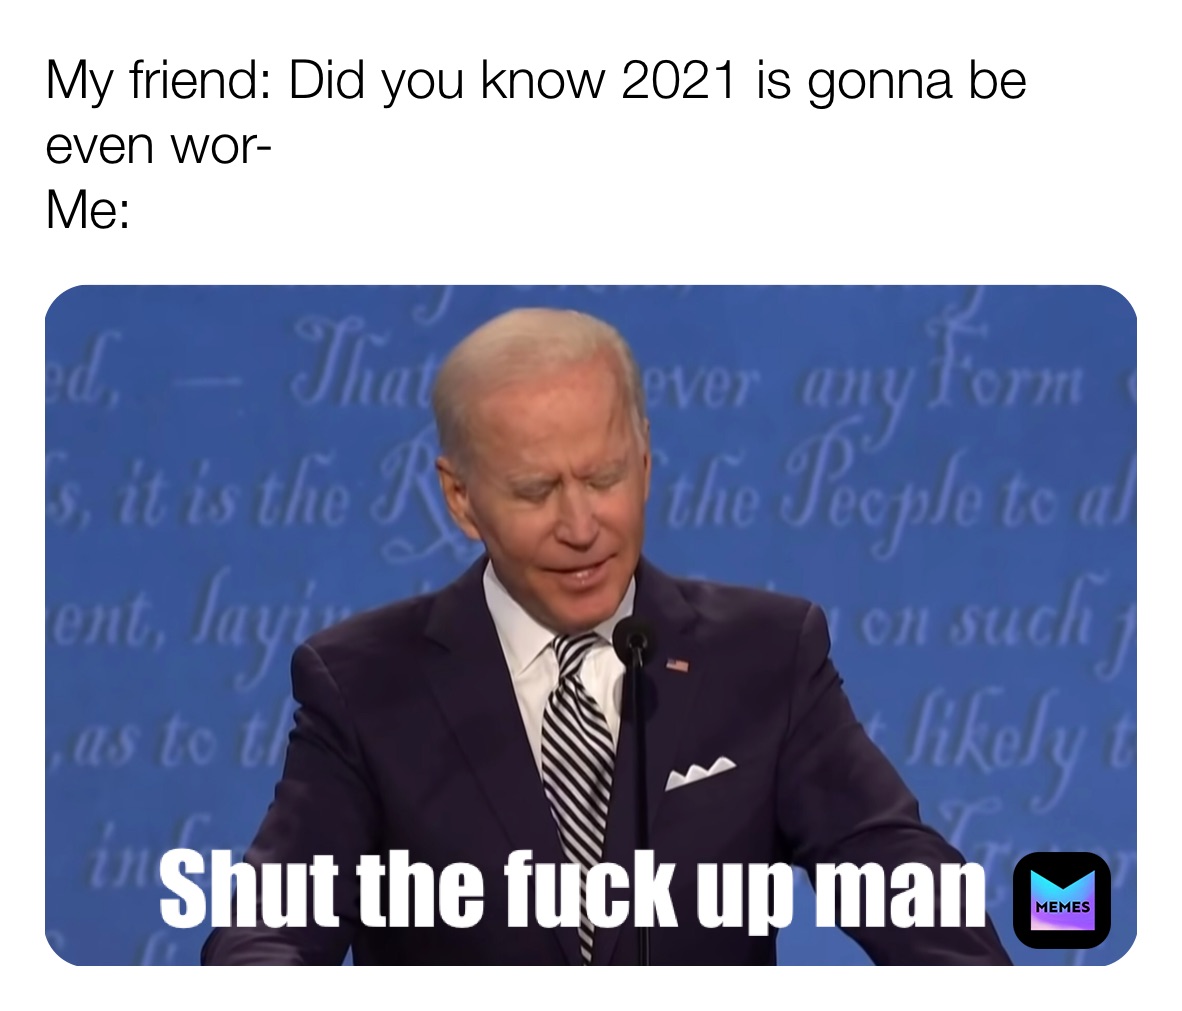 My friend: Did you know 2021 is gonna be even wor-
Me: Shut the fuck up man